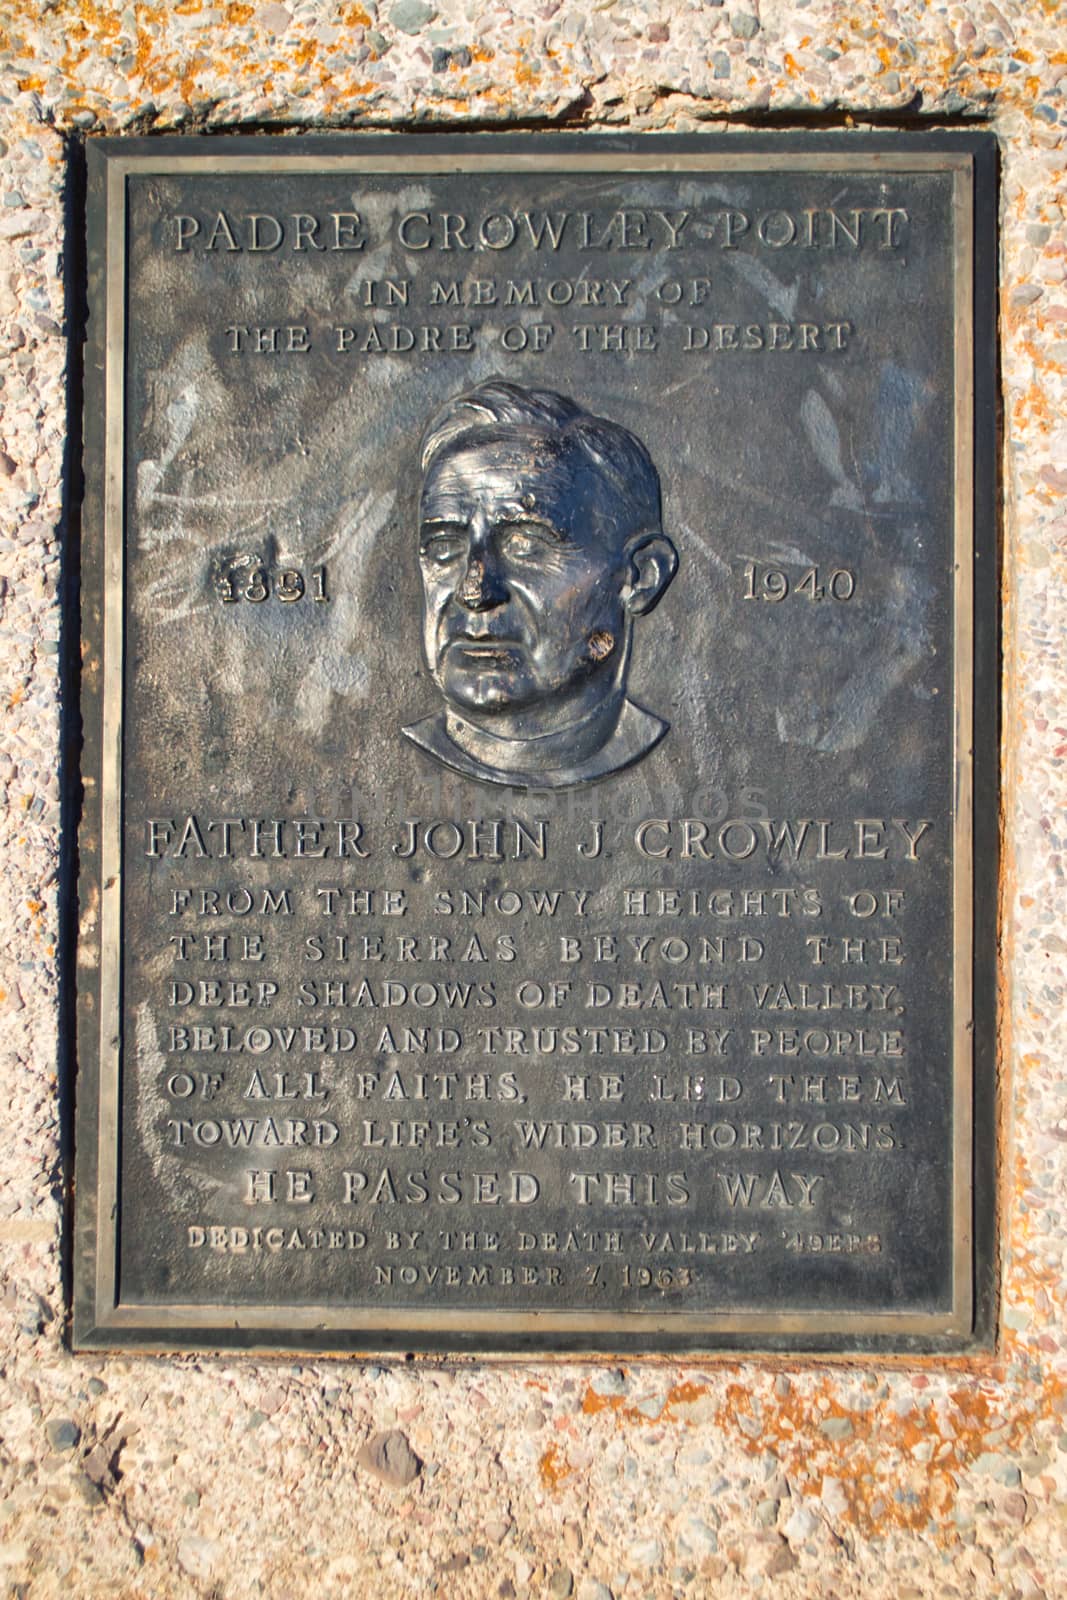 Padre Crowley point memorial plaque in Death Valley by kb79